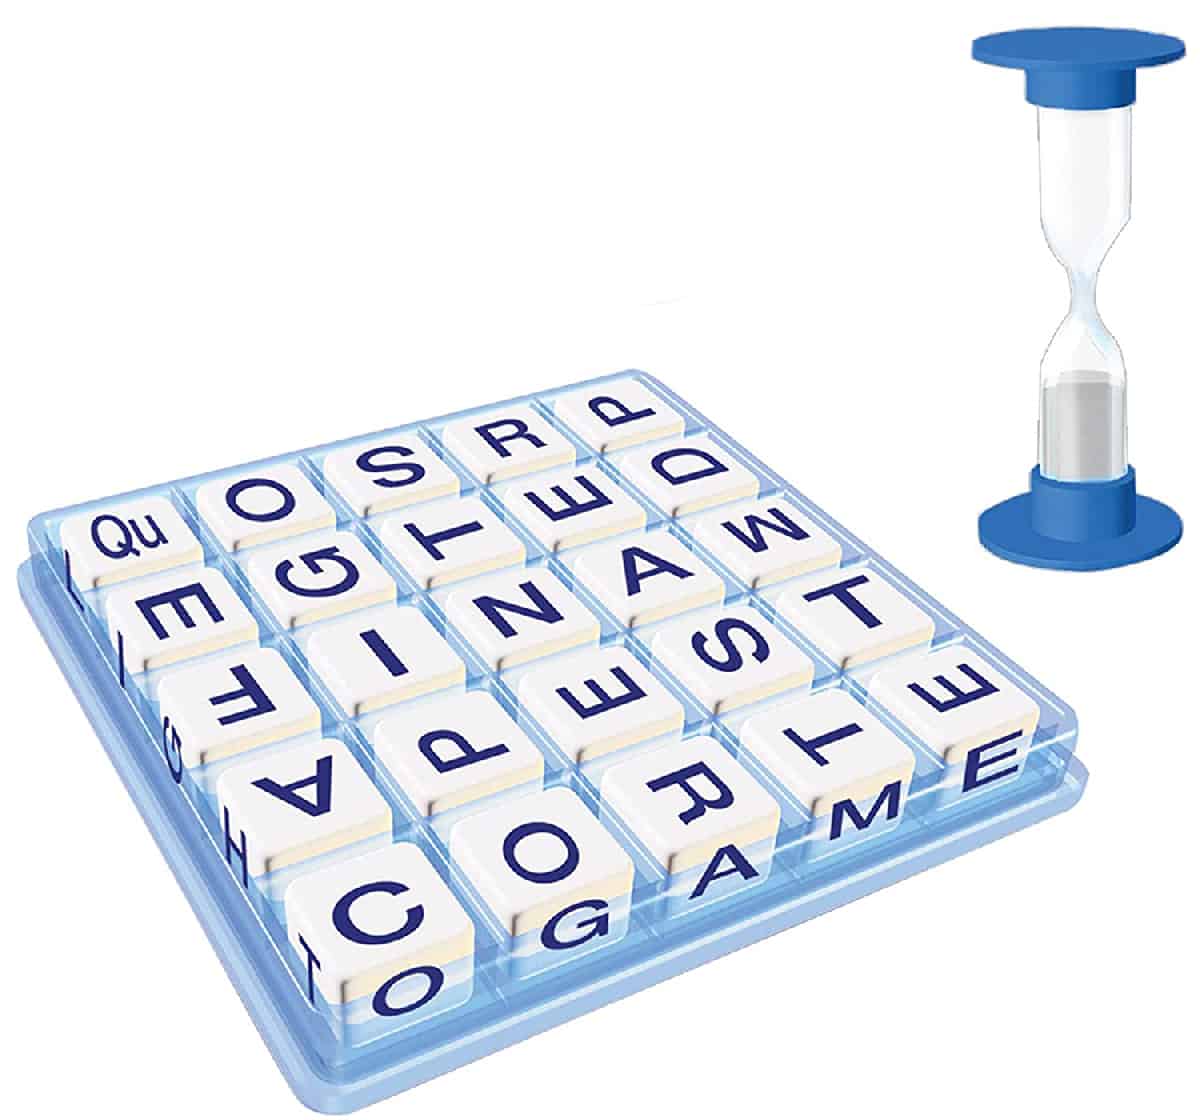 Big Boggle (Winning Moves) is a 3-minute word game.